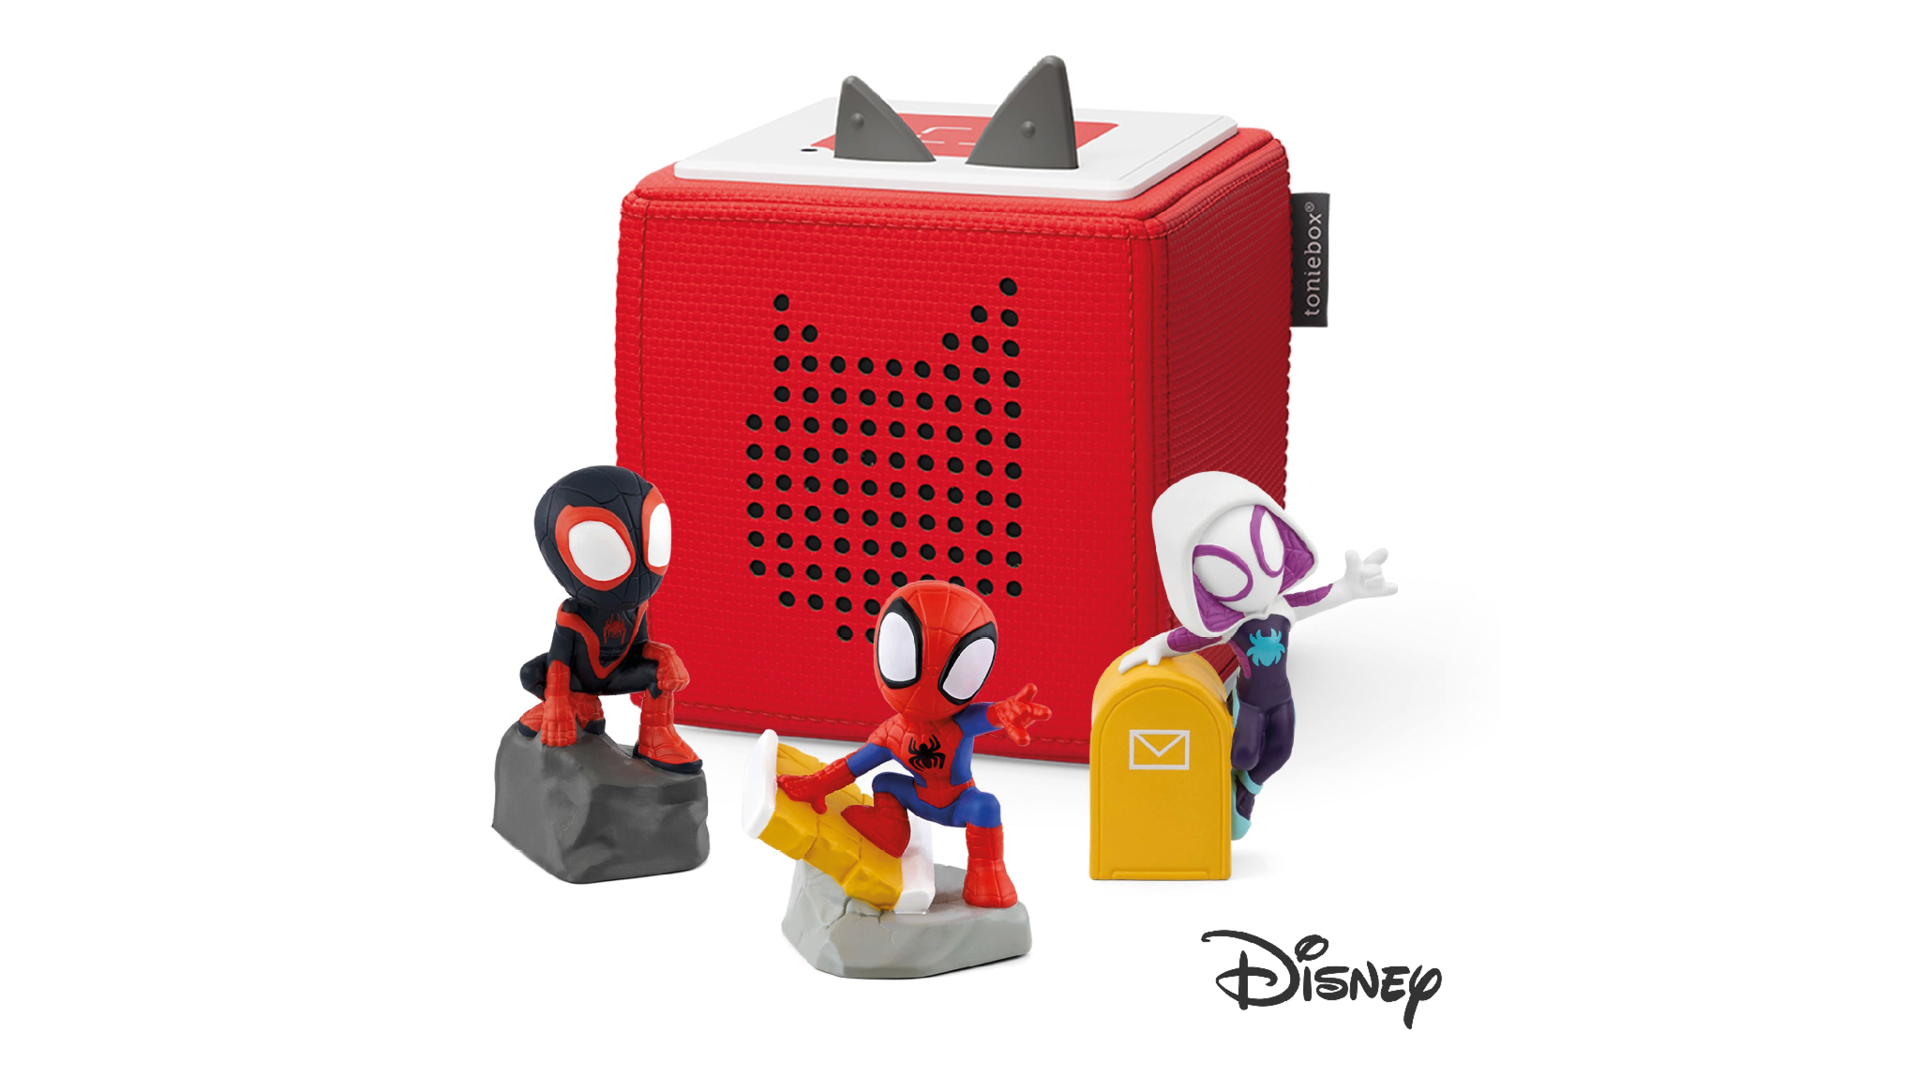  Tonies Spin Audio Play Character from Marvel Spidey